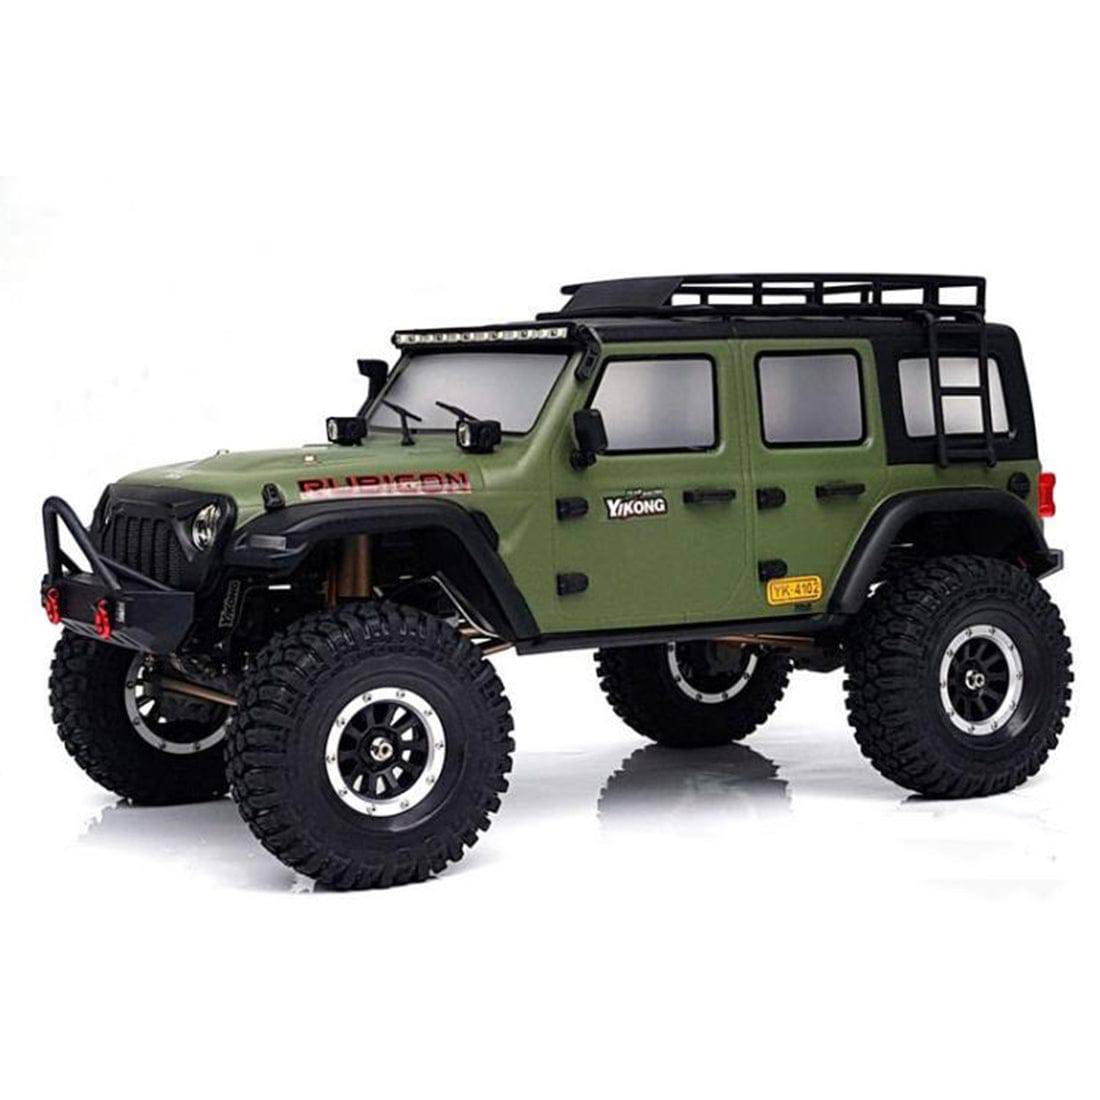 http://www.stirlingkit.com/cdn/shop/products/stirlingkit-yk-4102pro-1-10-2-4g-6ch-4wd-off-road-electric-rc-crawler-vehicle-car-truck-toy_3_9ffc76e7-5e30-46c9-9006-5fc8e1e1c9cd.jpg?v=1659531041